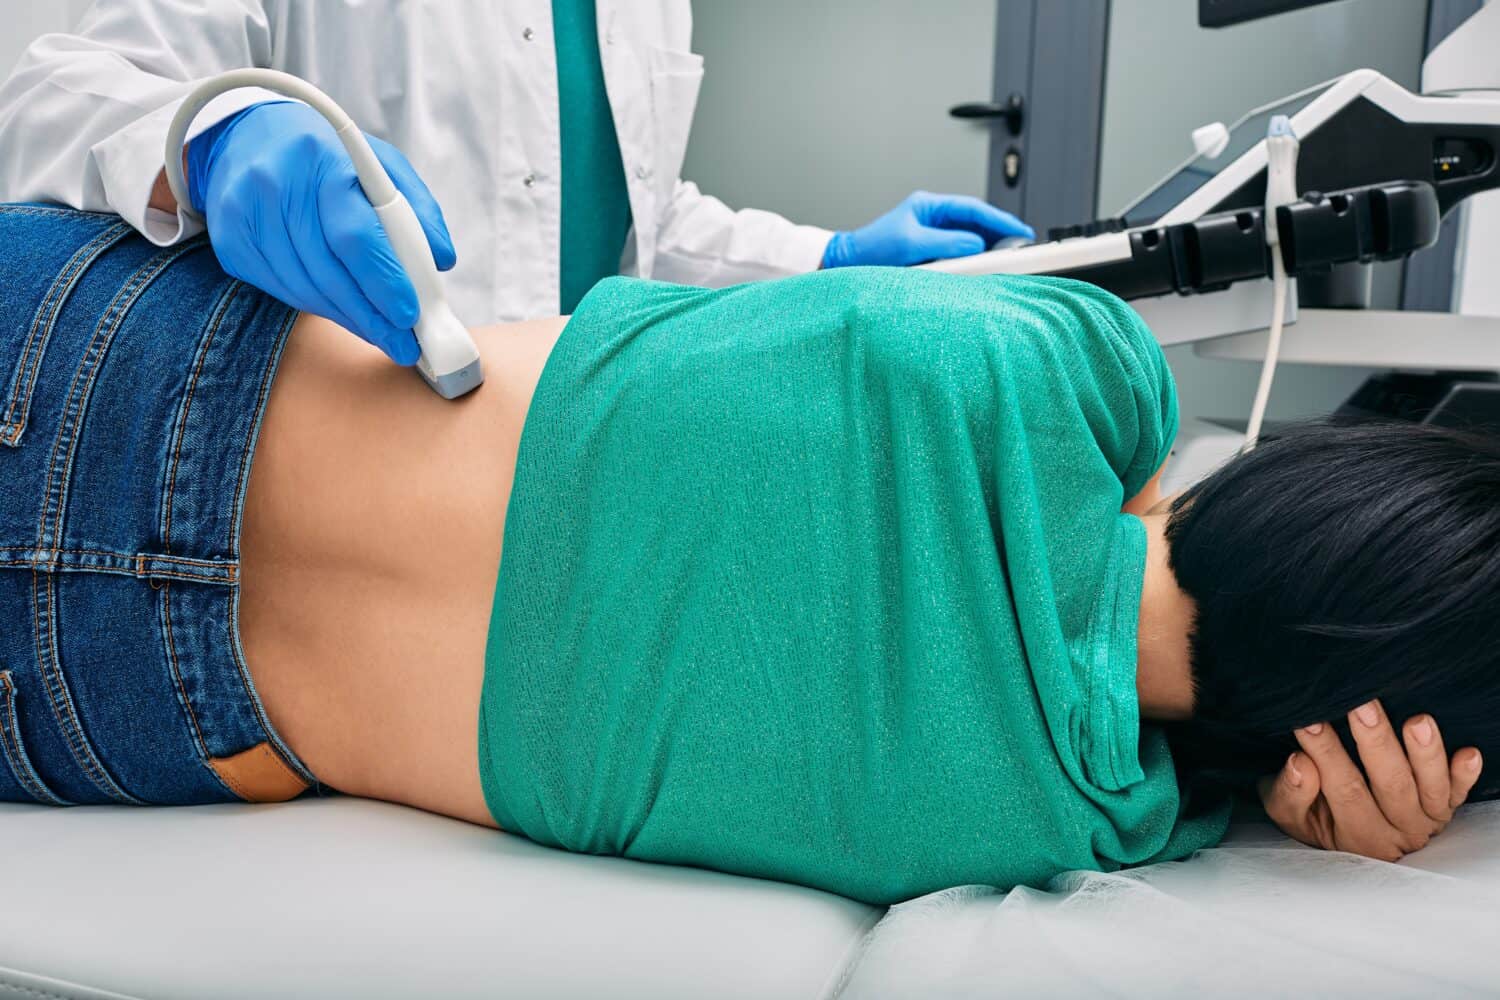 Ultrasound of kidneys. Woman patient during ultrasound examination in medical clinic lying on side, view from back